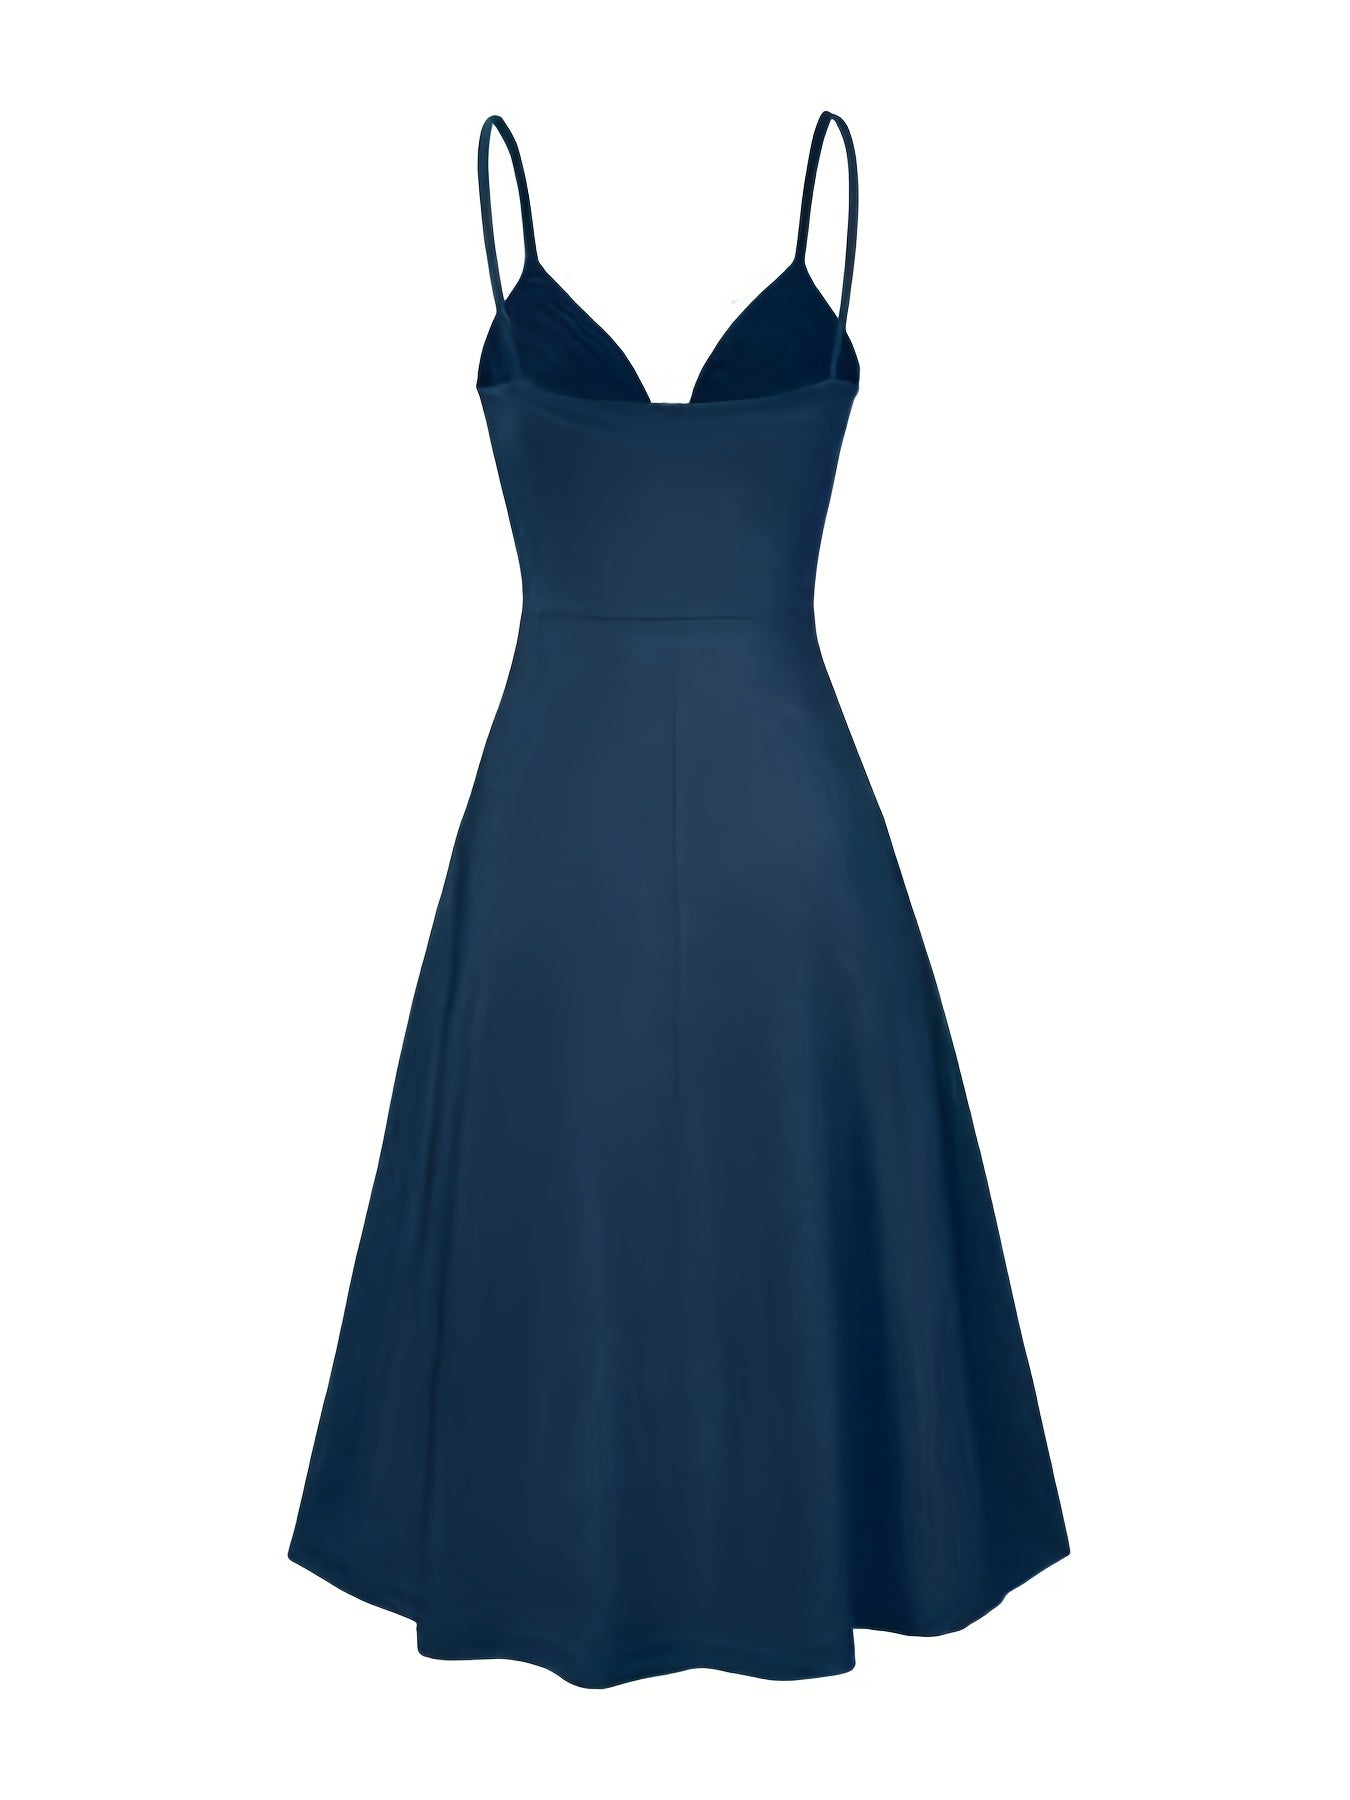 Empower Your Style with Our Elegant Twist Spaghetti Strap Dress for Women